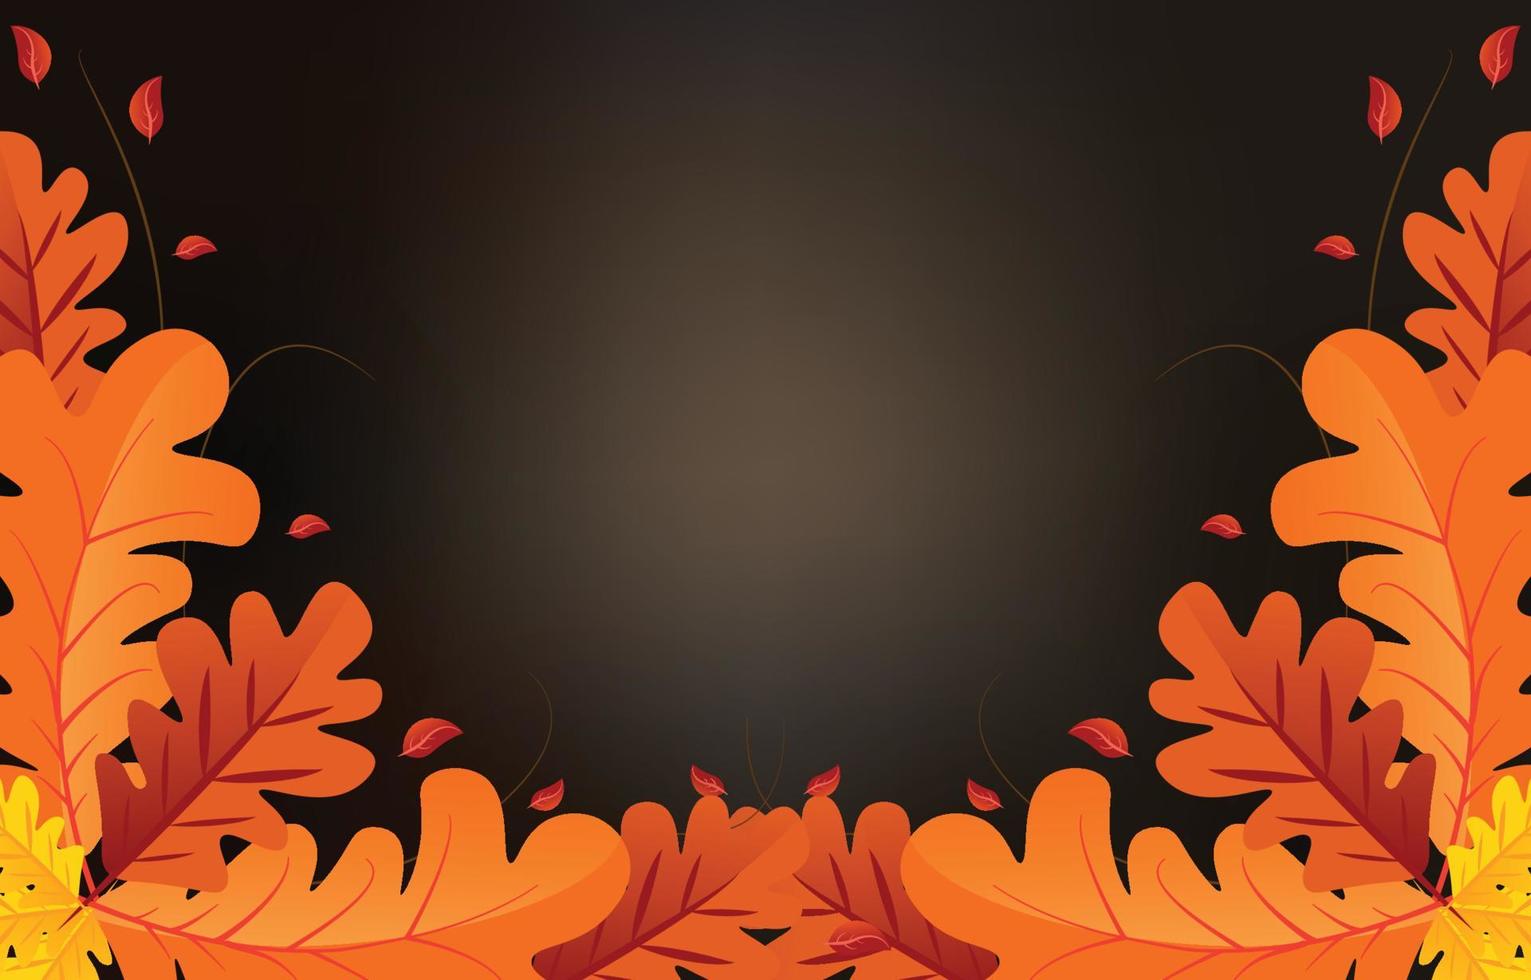 Autumn background with leaves golden yellow. fall concept,For wallpaper, postcards, greeting cards, website pages, banners, online sales. Vector illustration